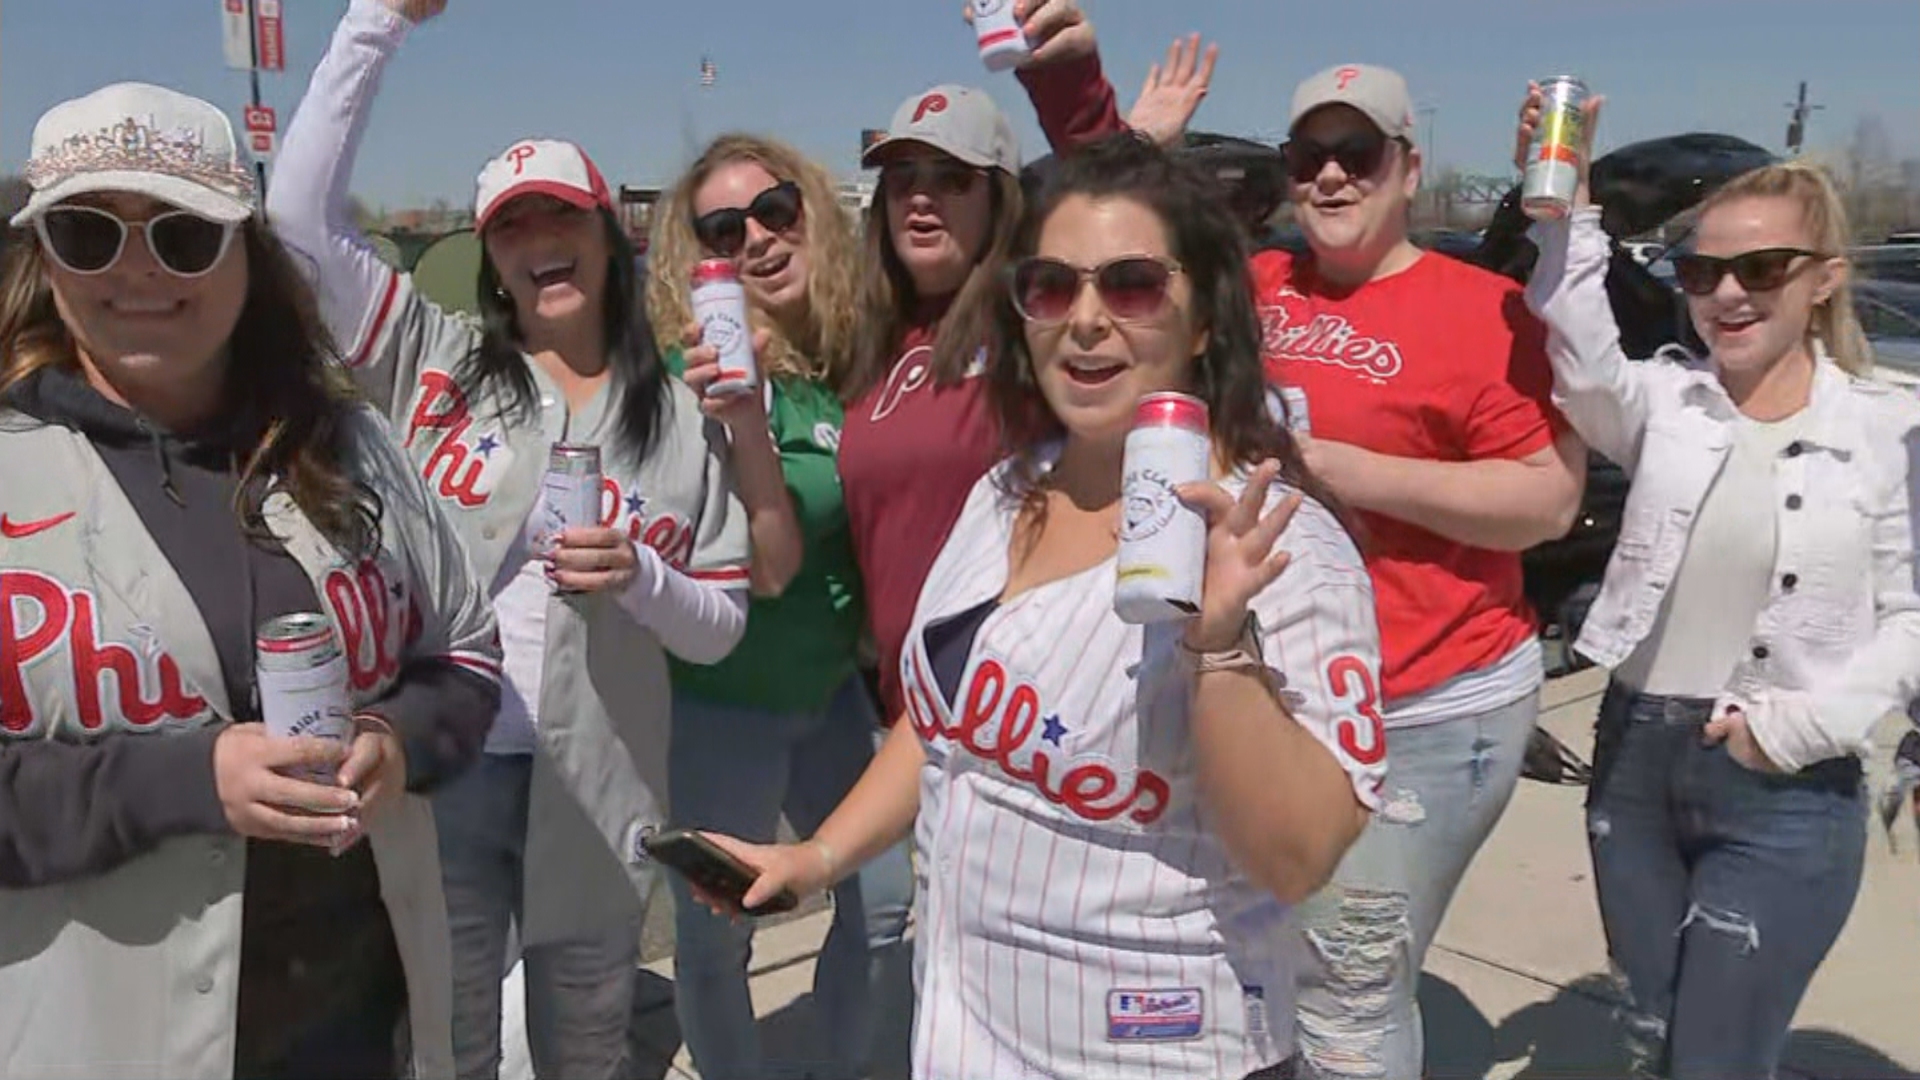 Phillies Fans Tailgate, Buy Merchandise Ahead Of Opening Day Against Oakland Athletics